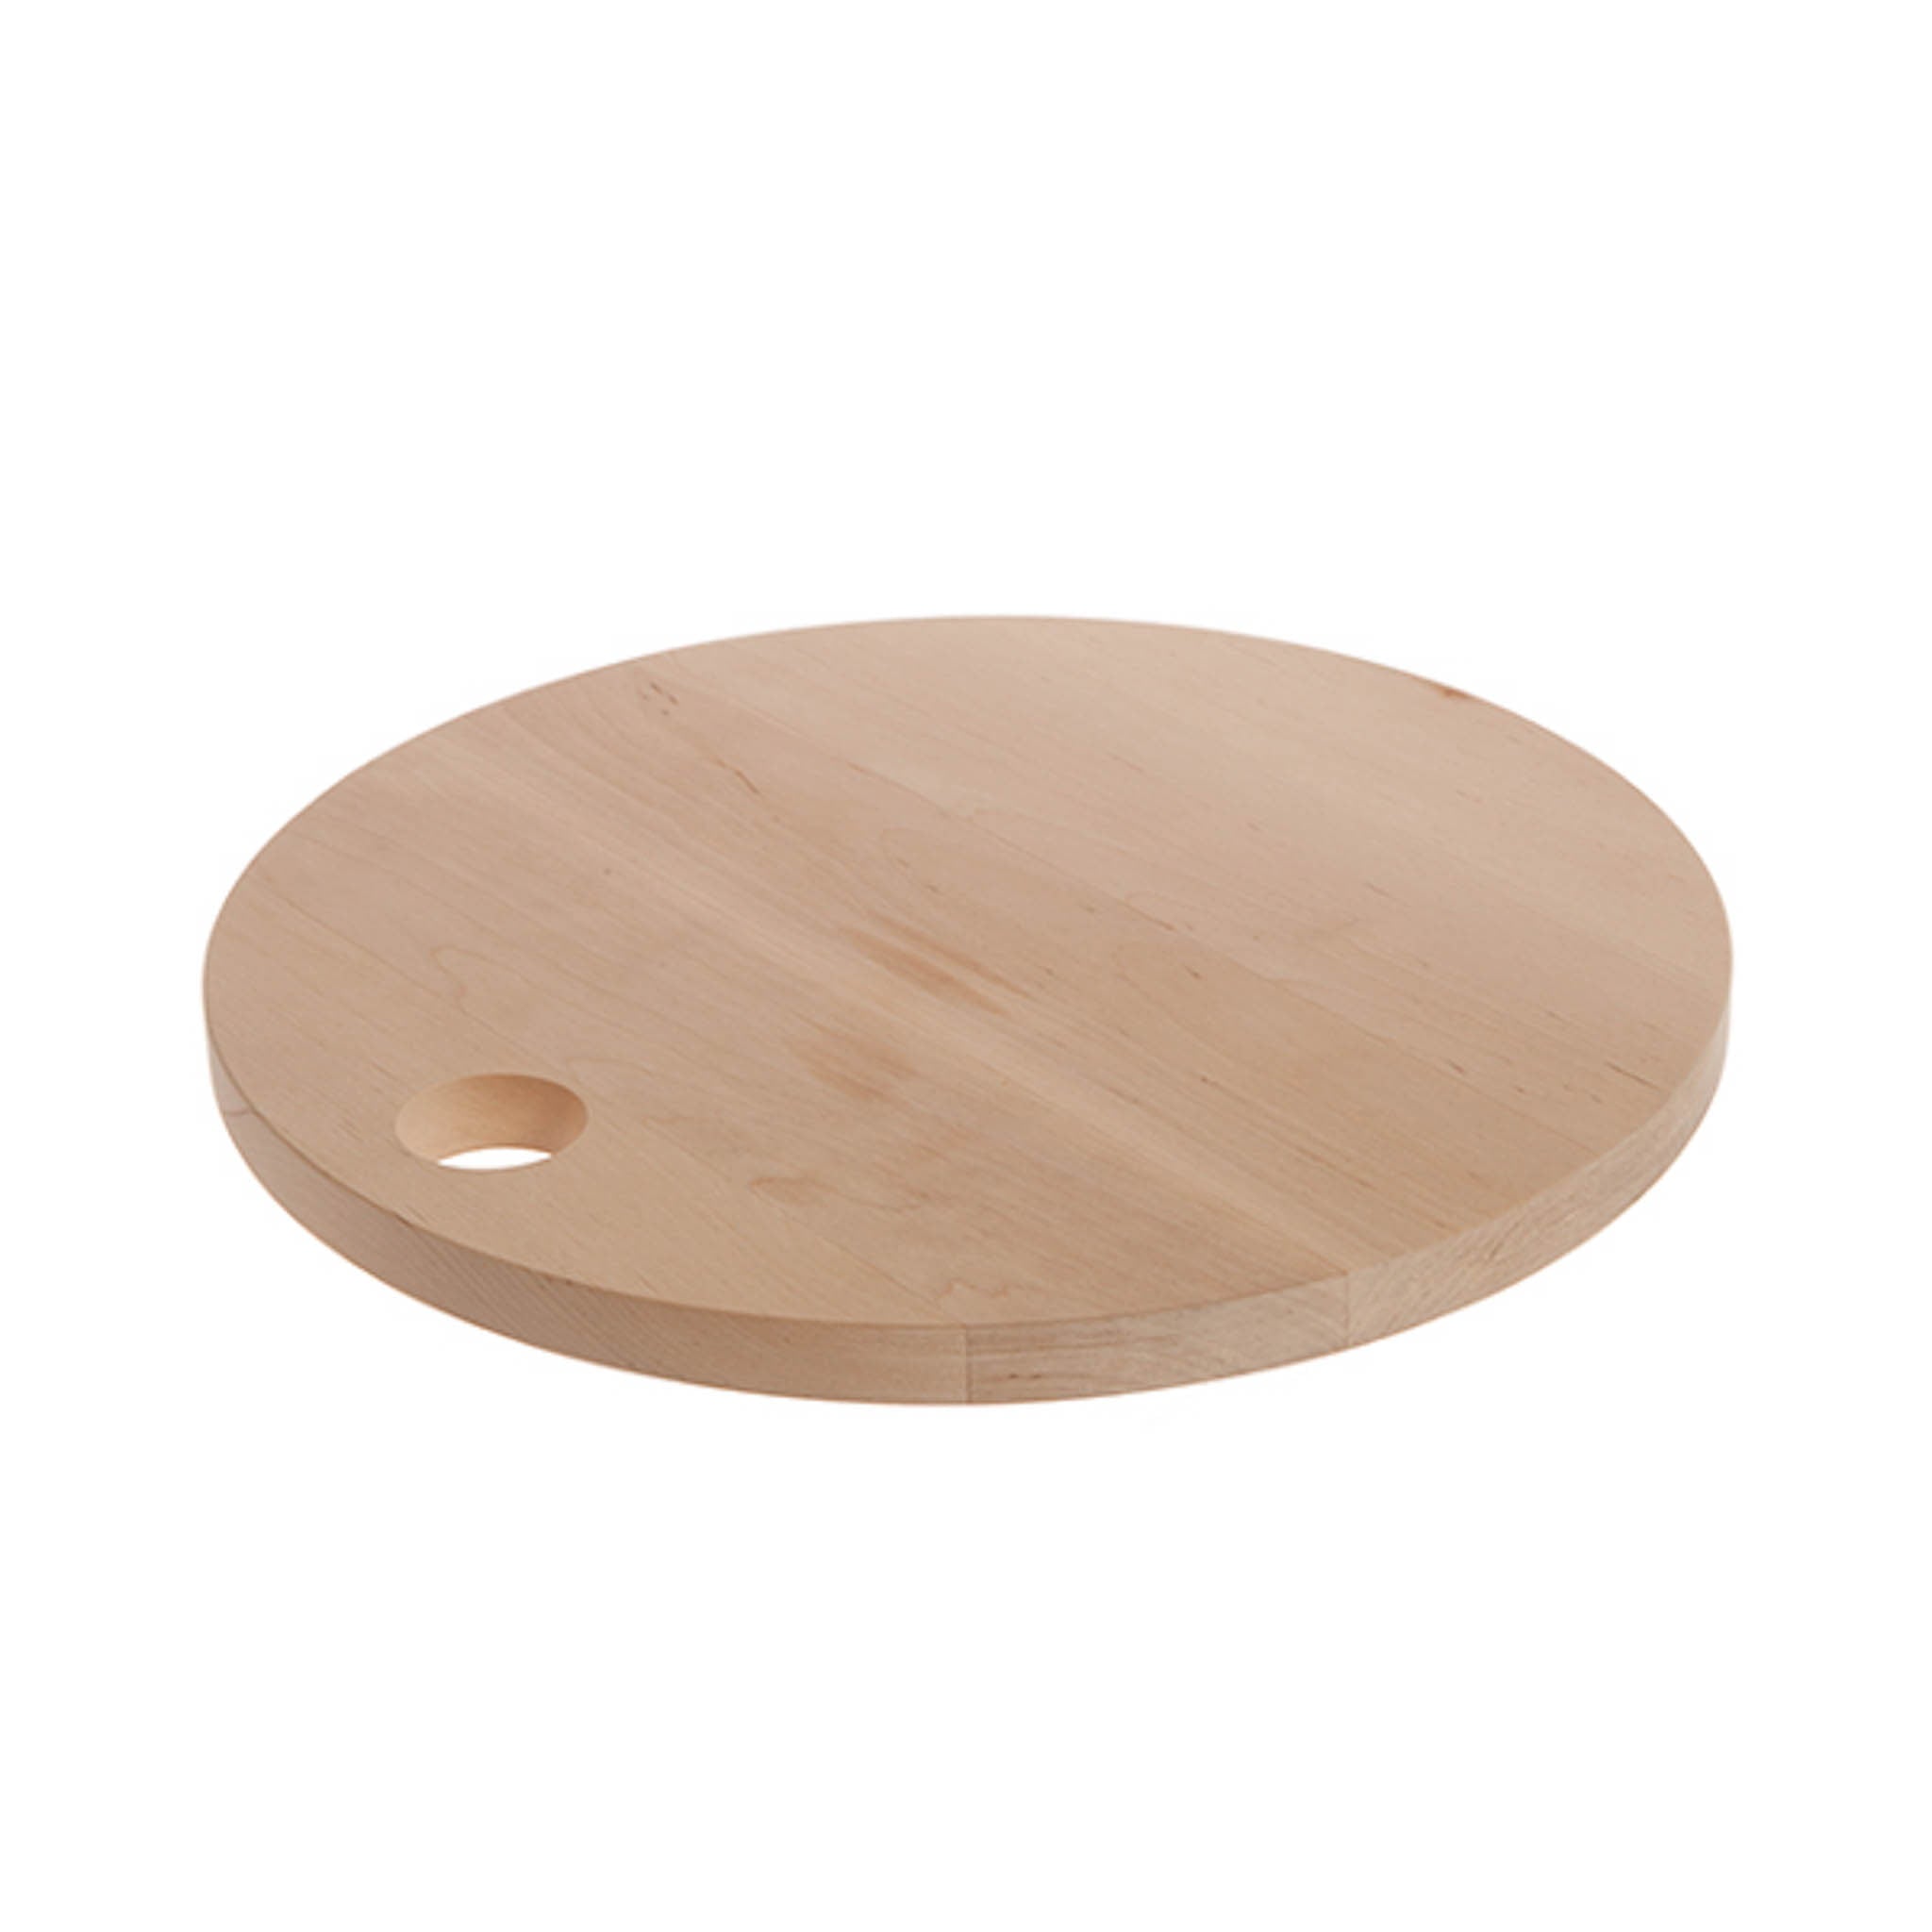 Birchwood Round Serving and Chopping Board 32.5cm